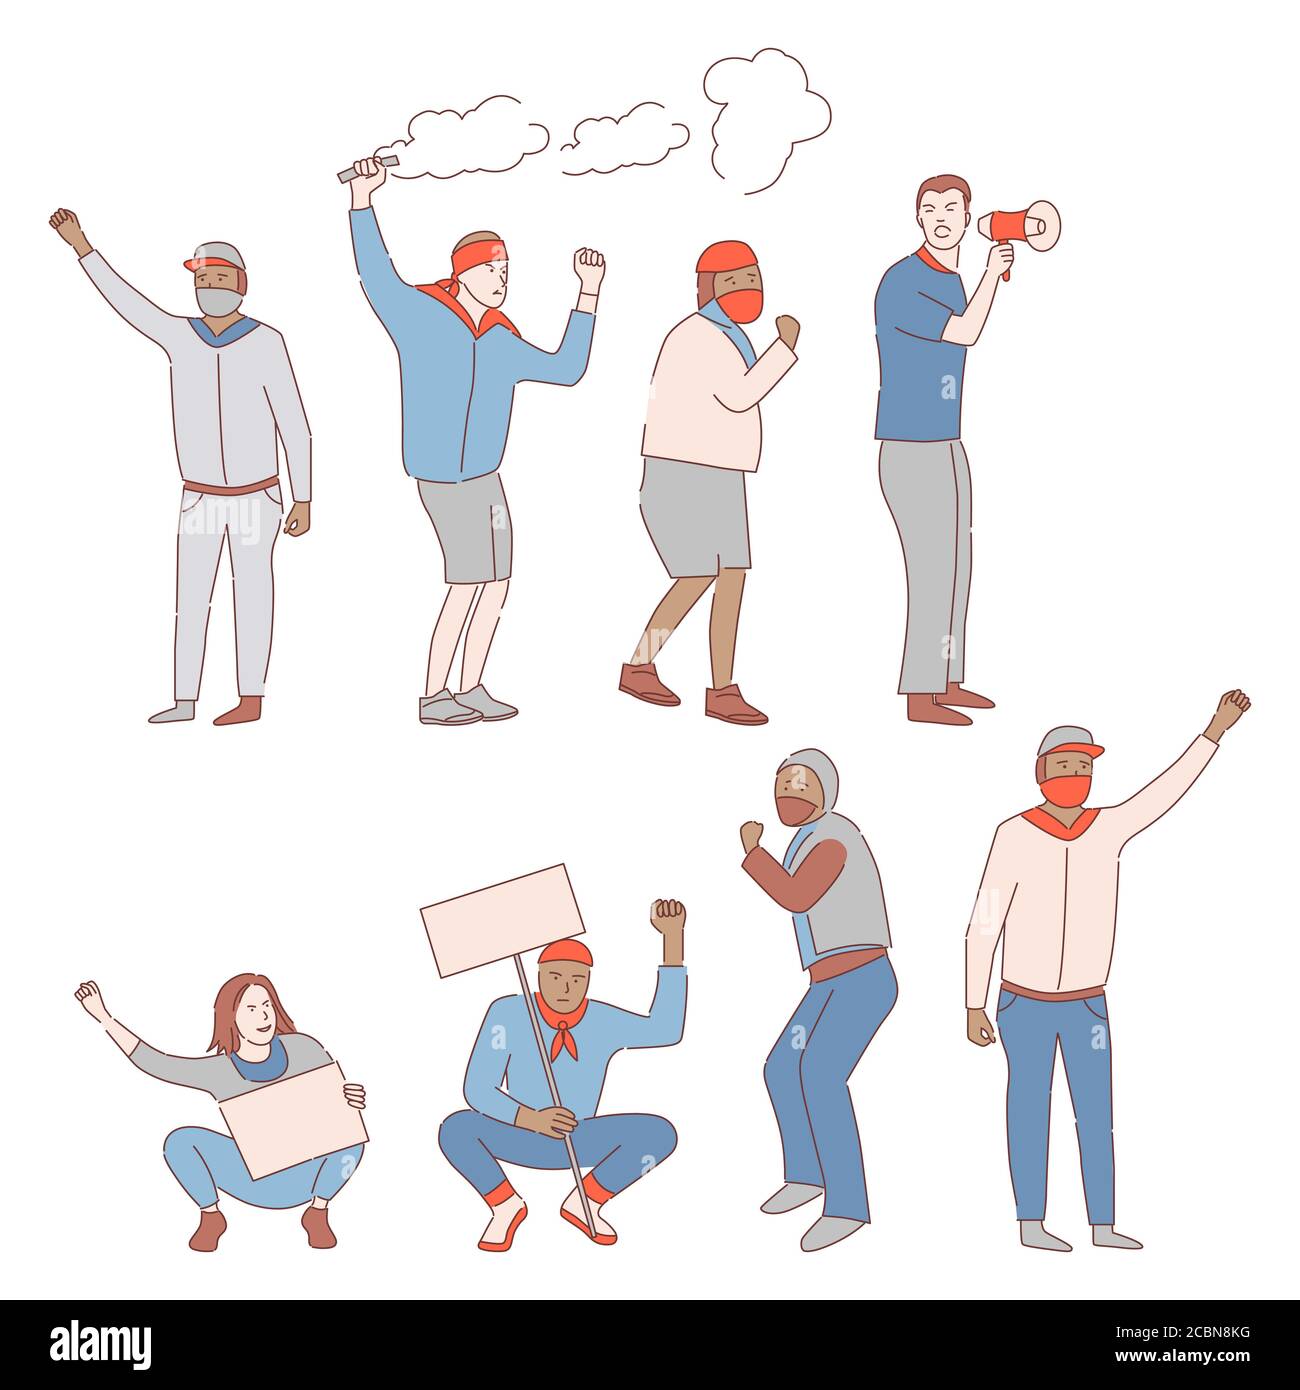 People protesting vector cartoon outline illustration. Angry men holding placards, banners, and loudspeakers and protesting against racism, inequality. Black lives matter concept. Stock Vector